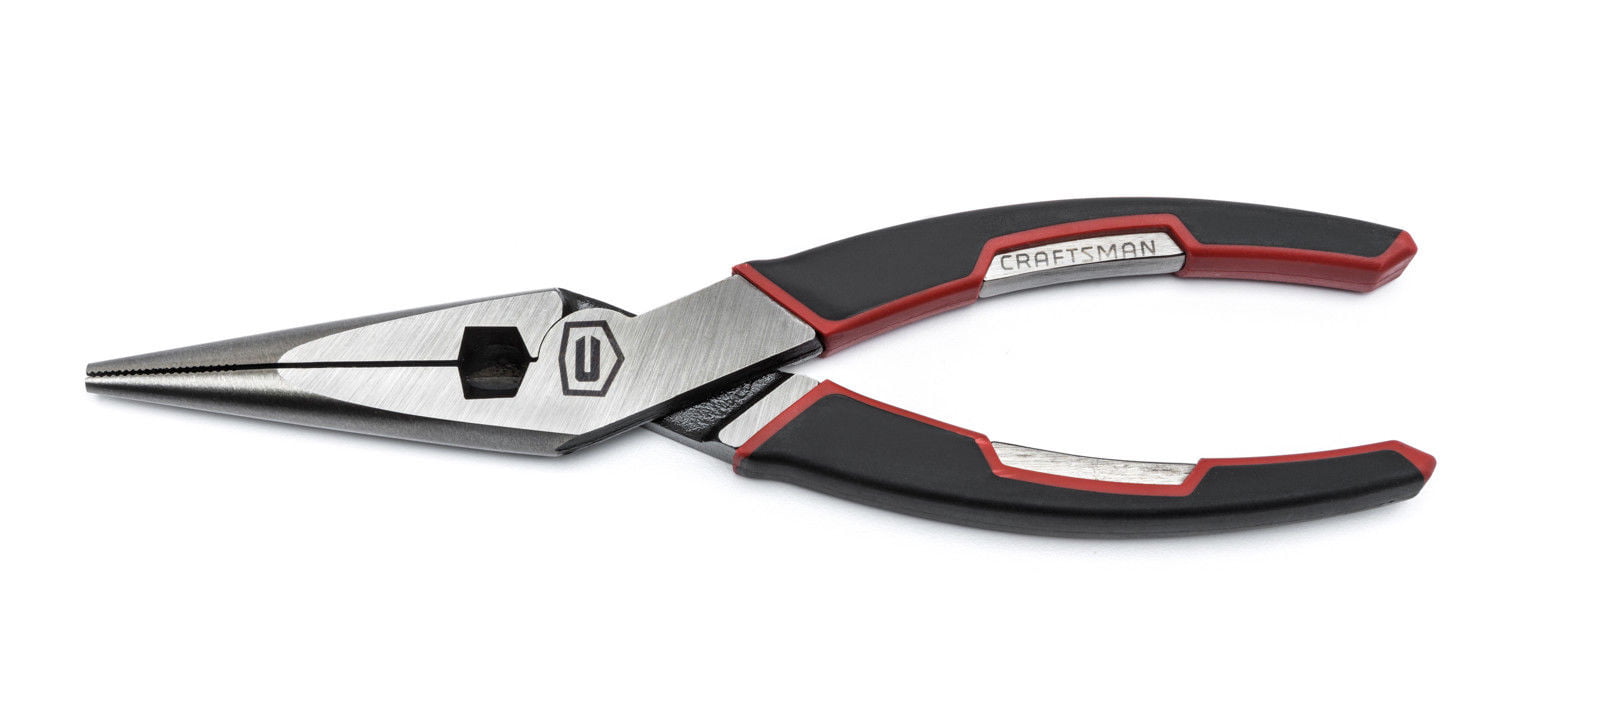 CRAFTSMAN 8-in Electrical Cutting Pliers in the Cutting Pliers department  at